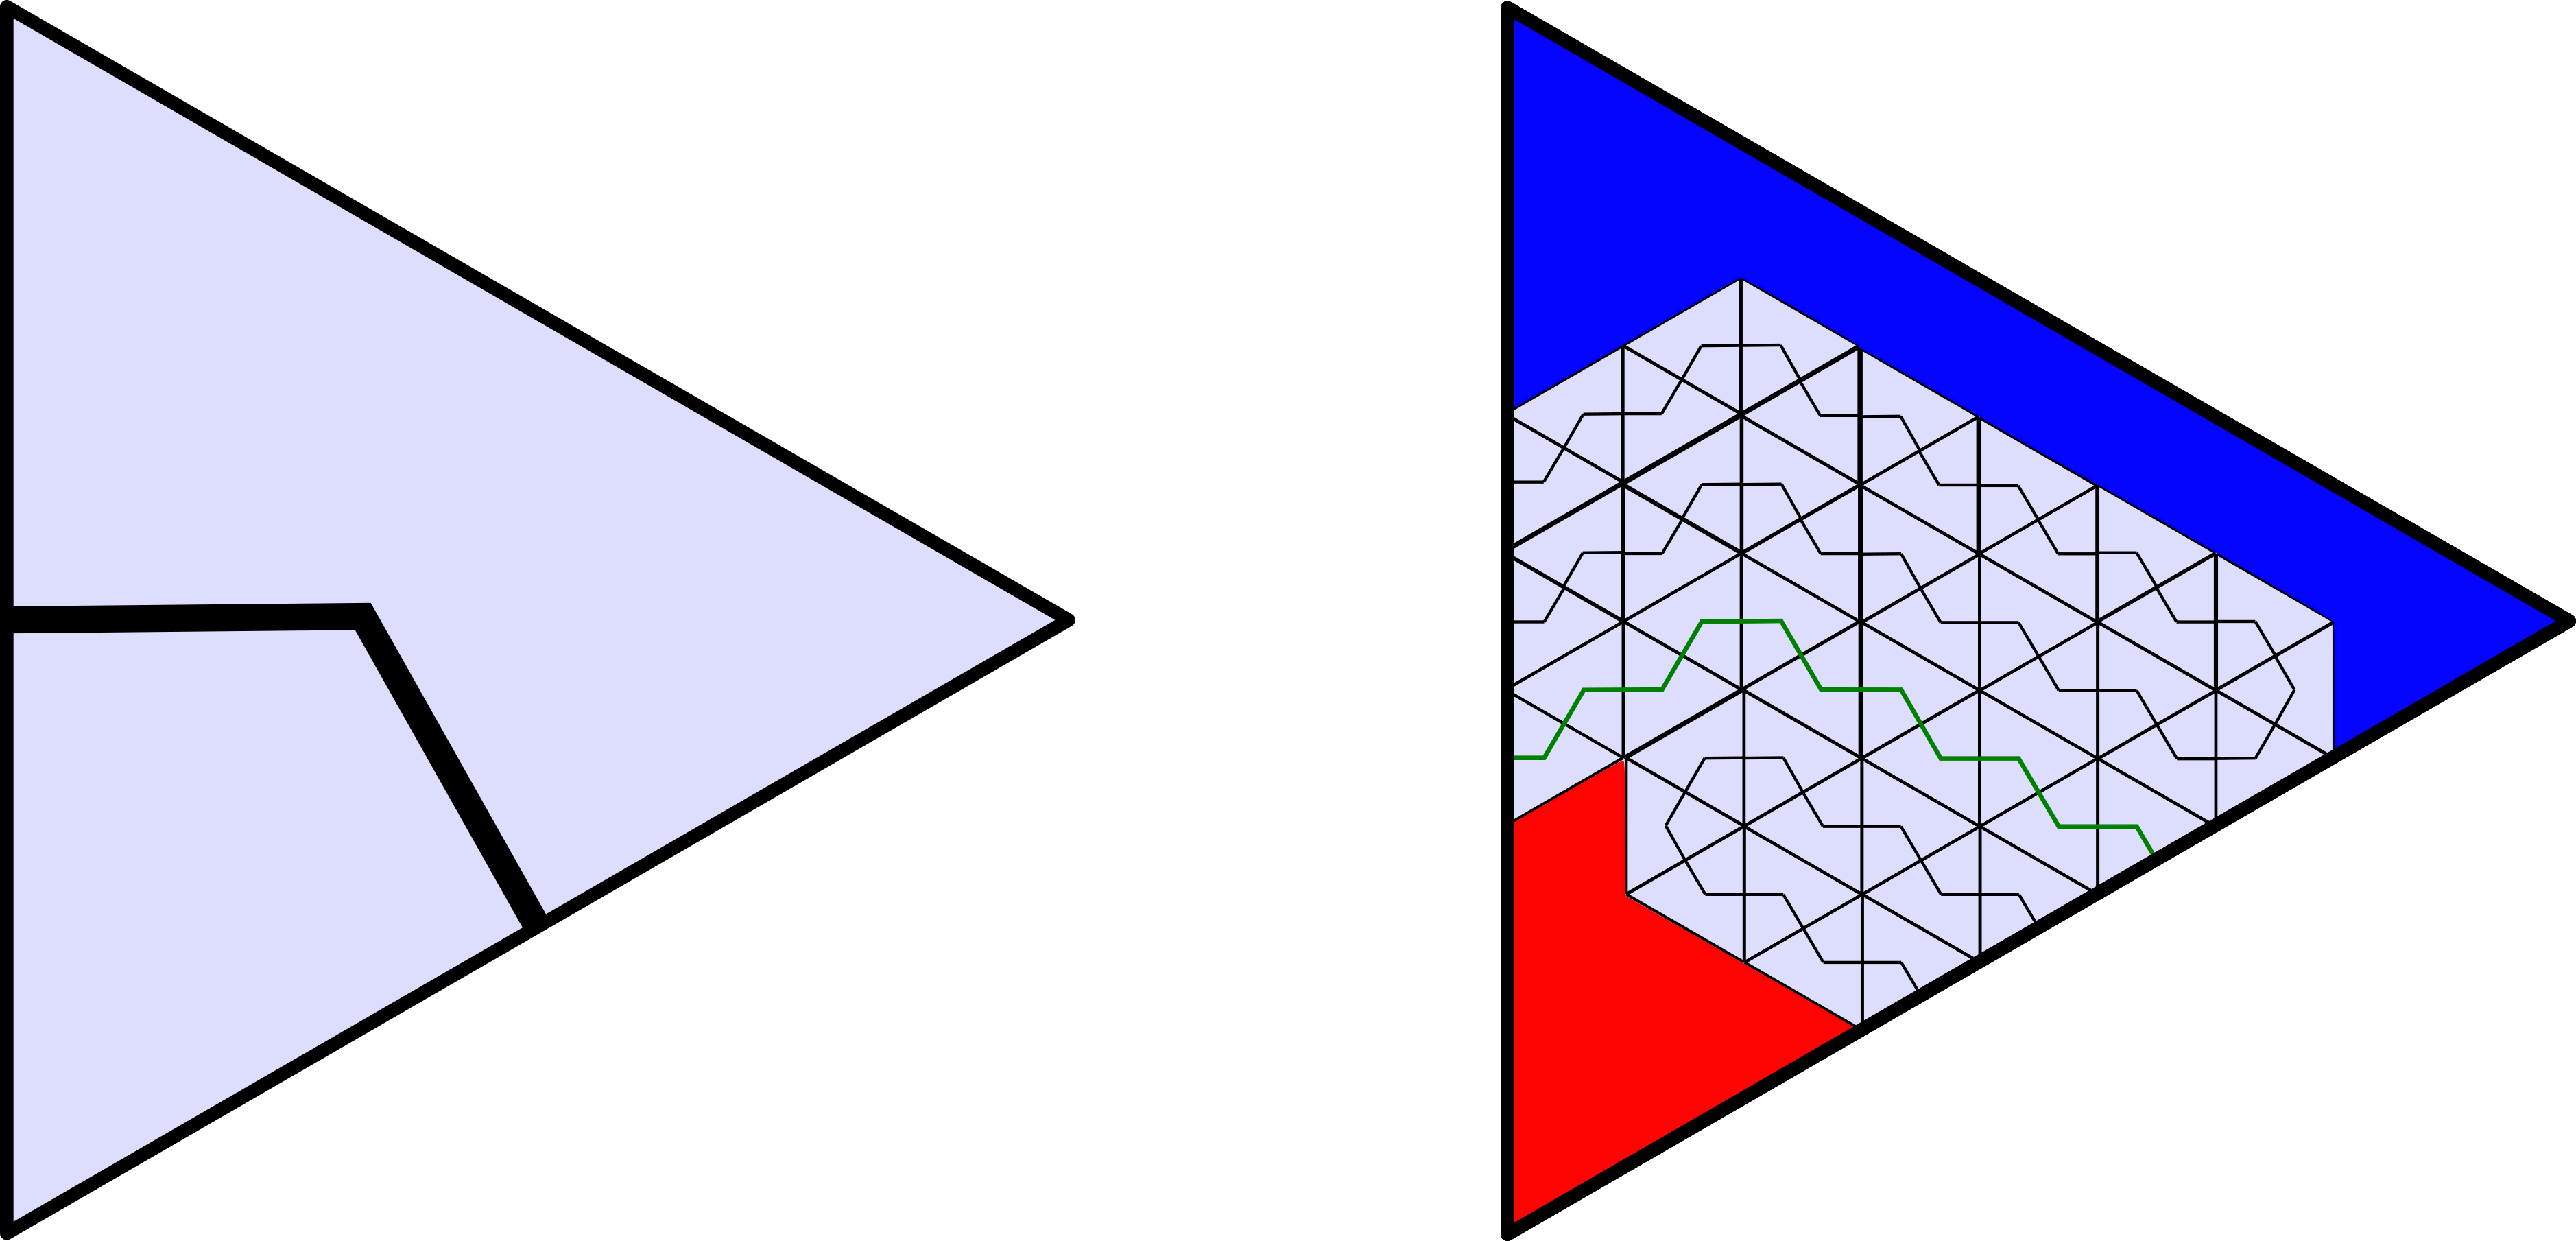 The blue and red regions in a triangle.